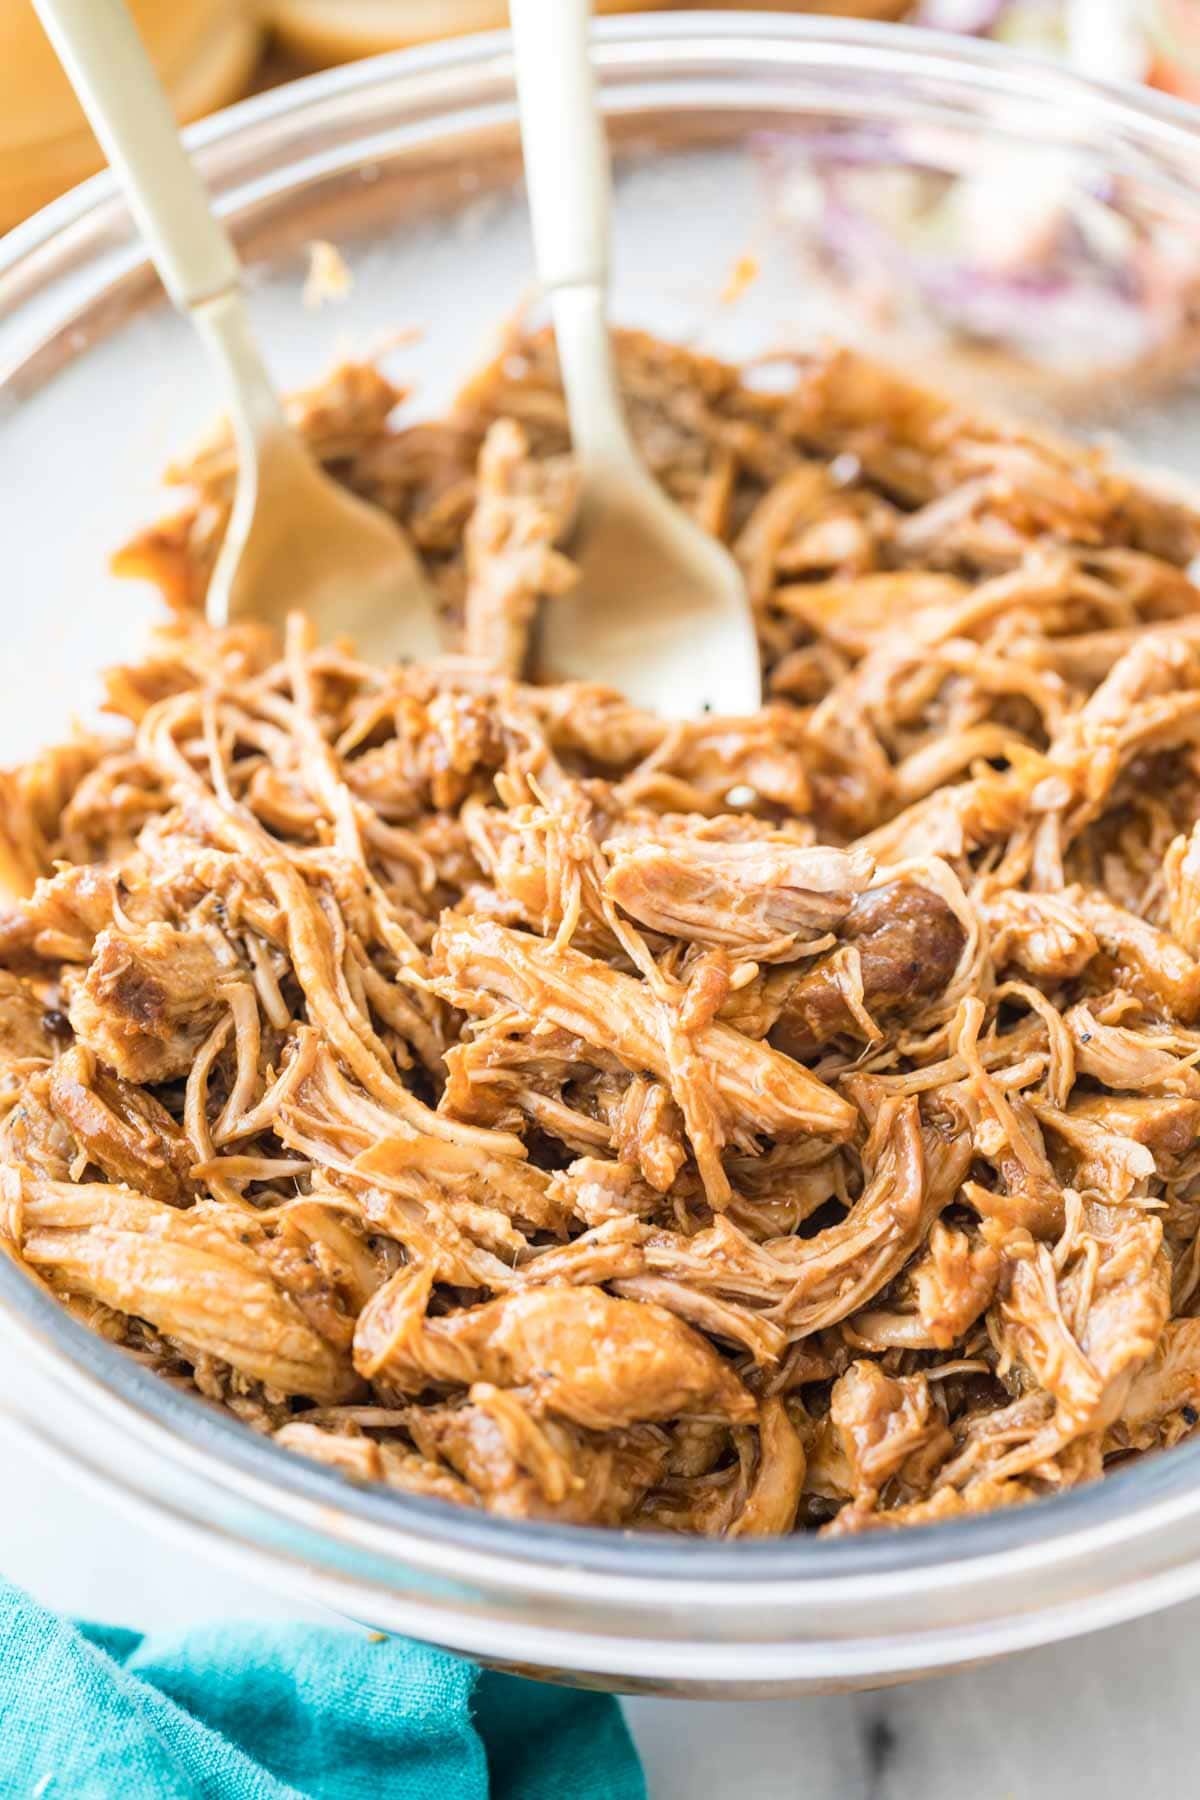 pulled pork after being shredded with two forks